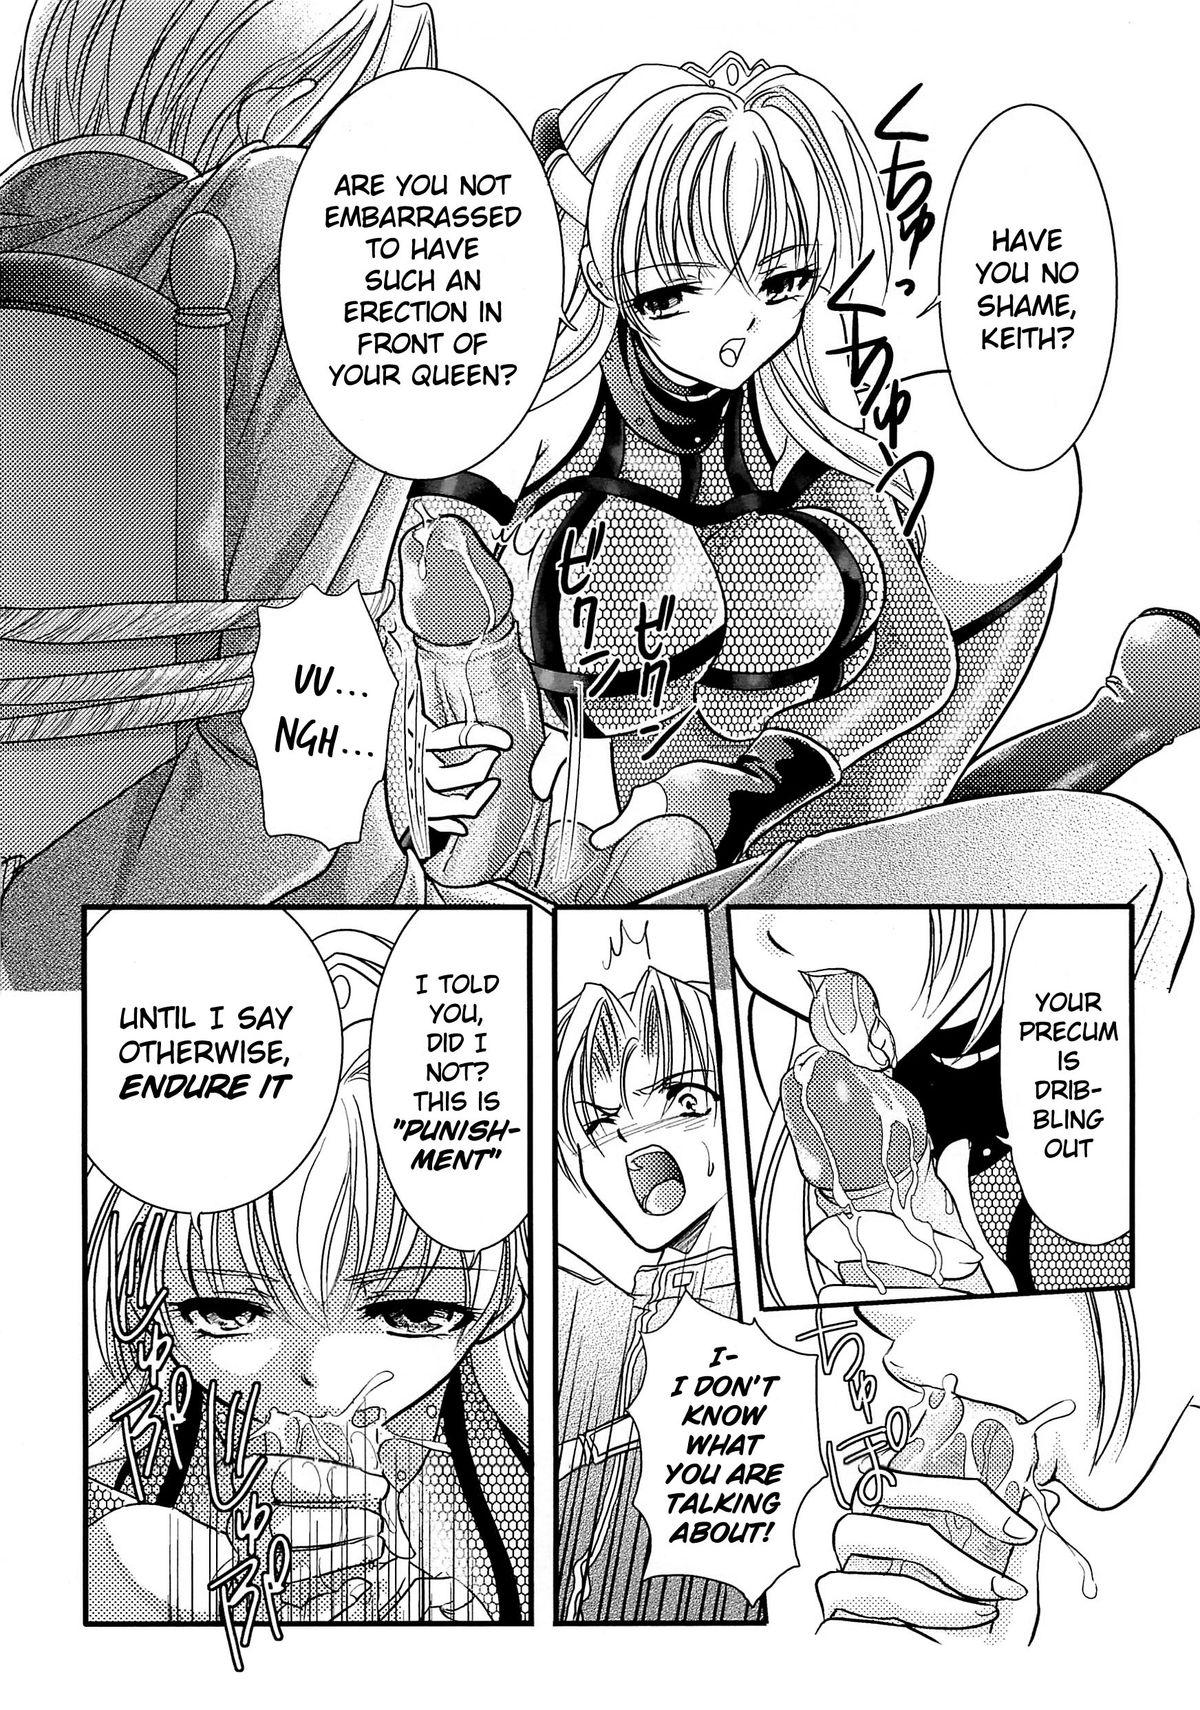 Kissing The Princess Knight's Depravity Game - Inda no himekishi janne Brother Sister - Page 6